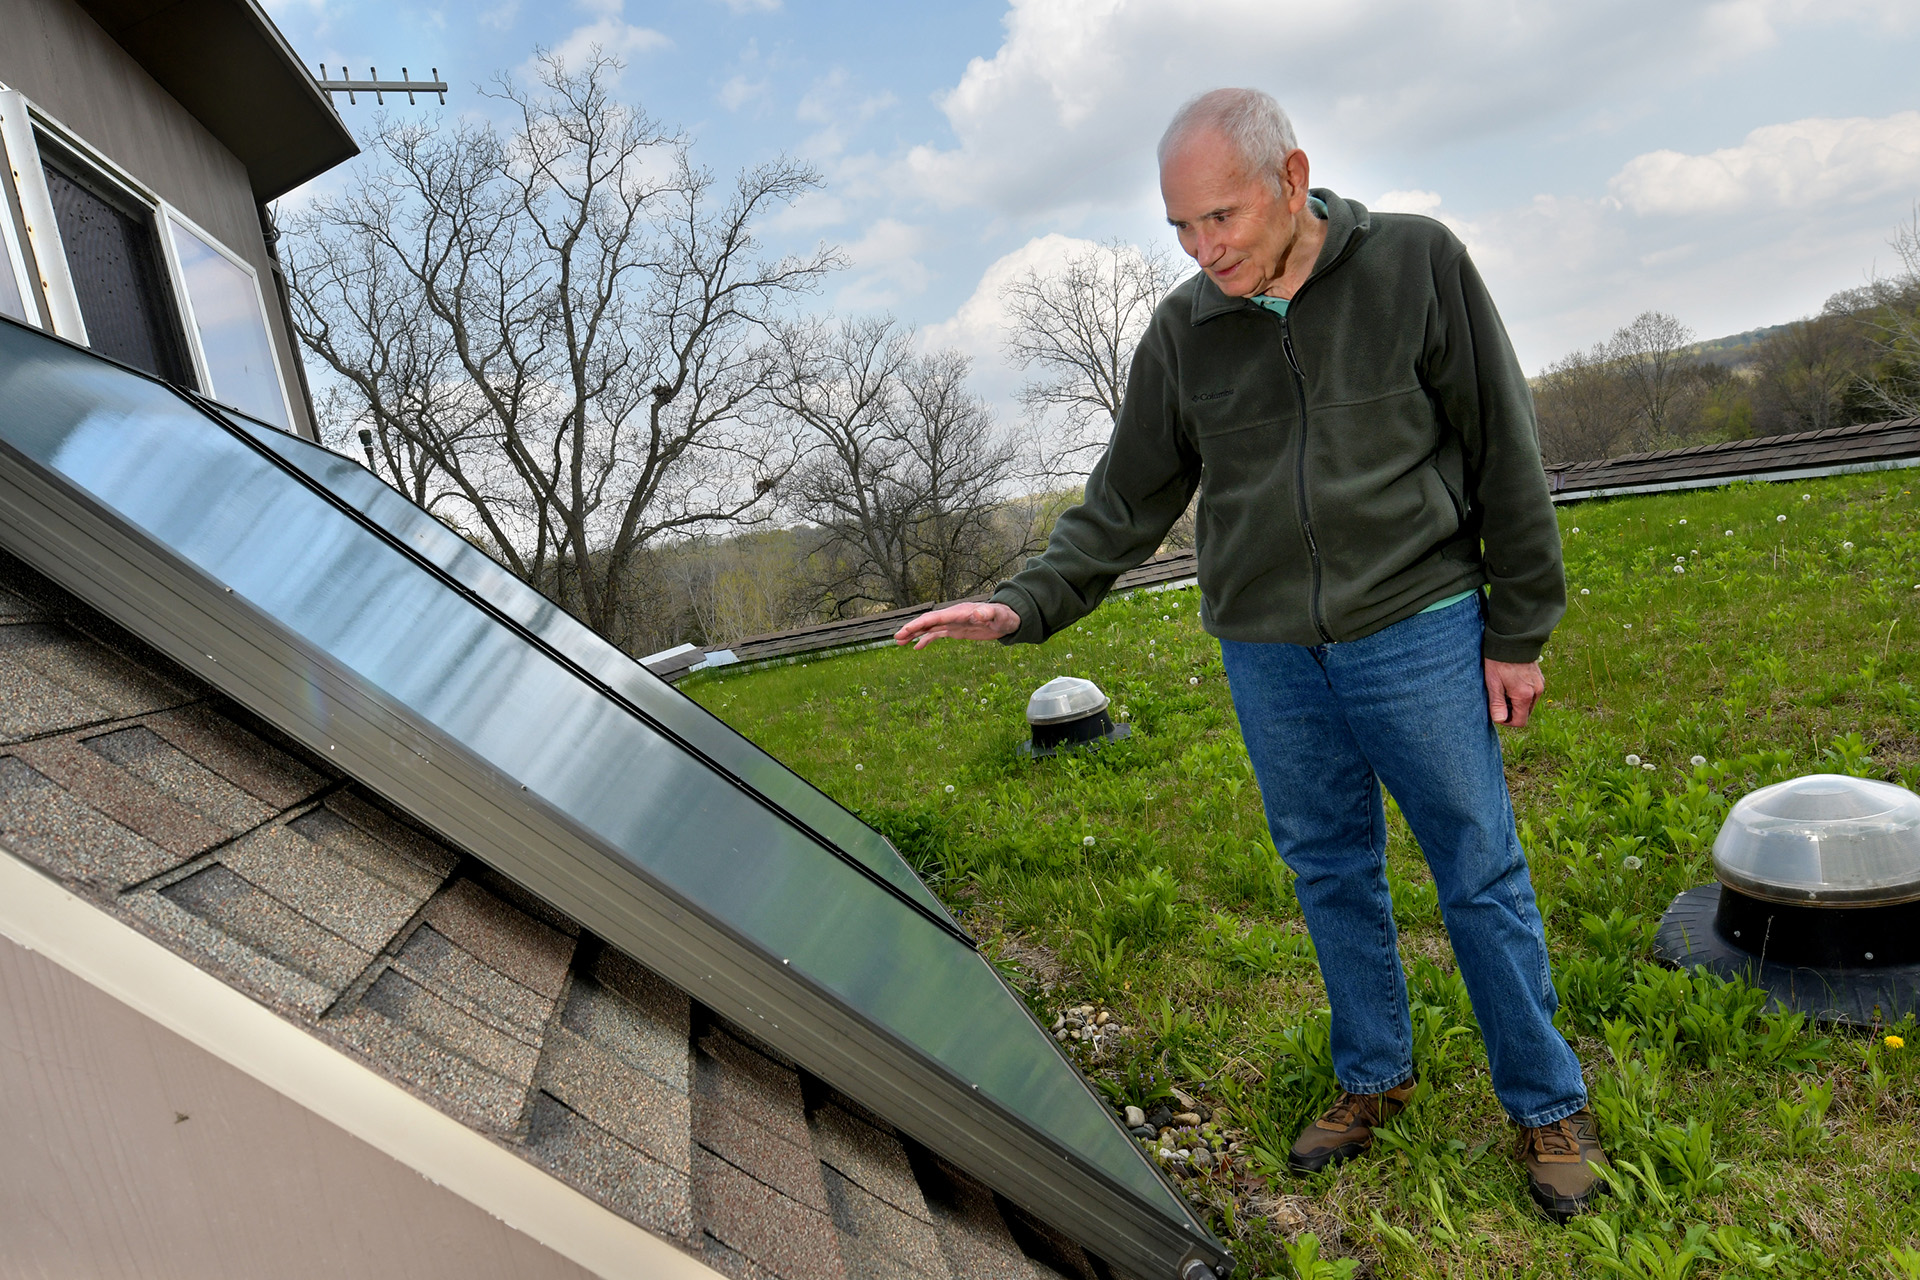 The rooftop water heating element uses the power of the sun to generate heat at Roger Wehage’s earth home in Chillicothe